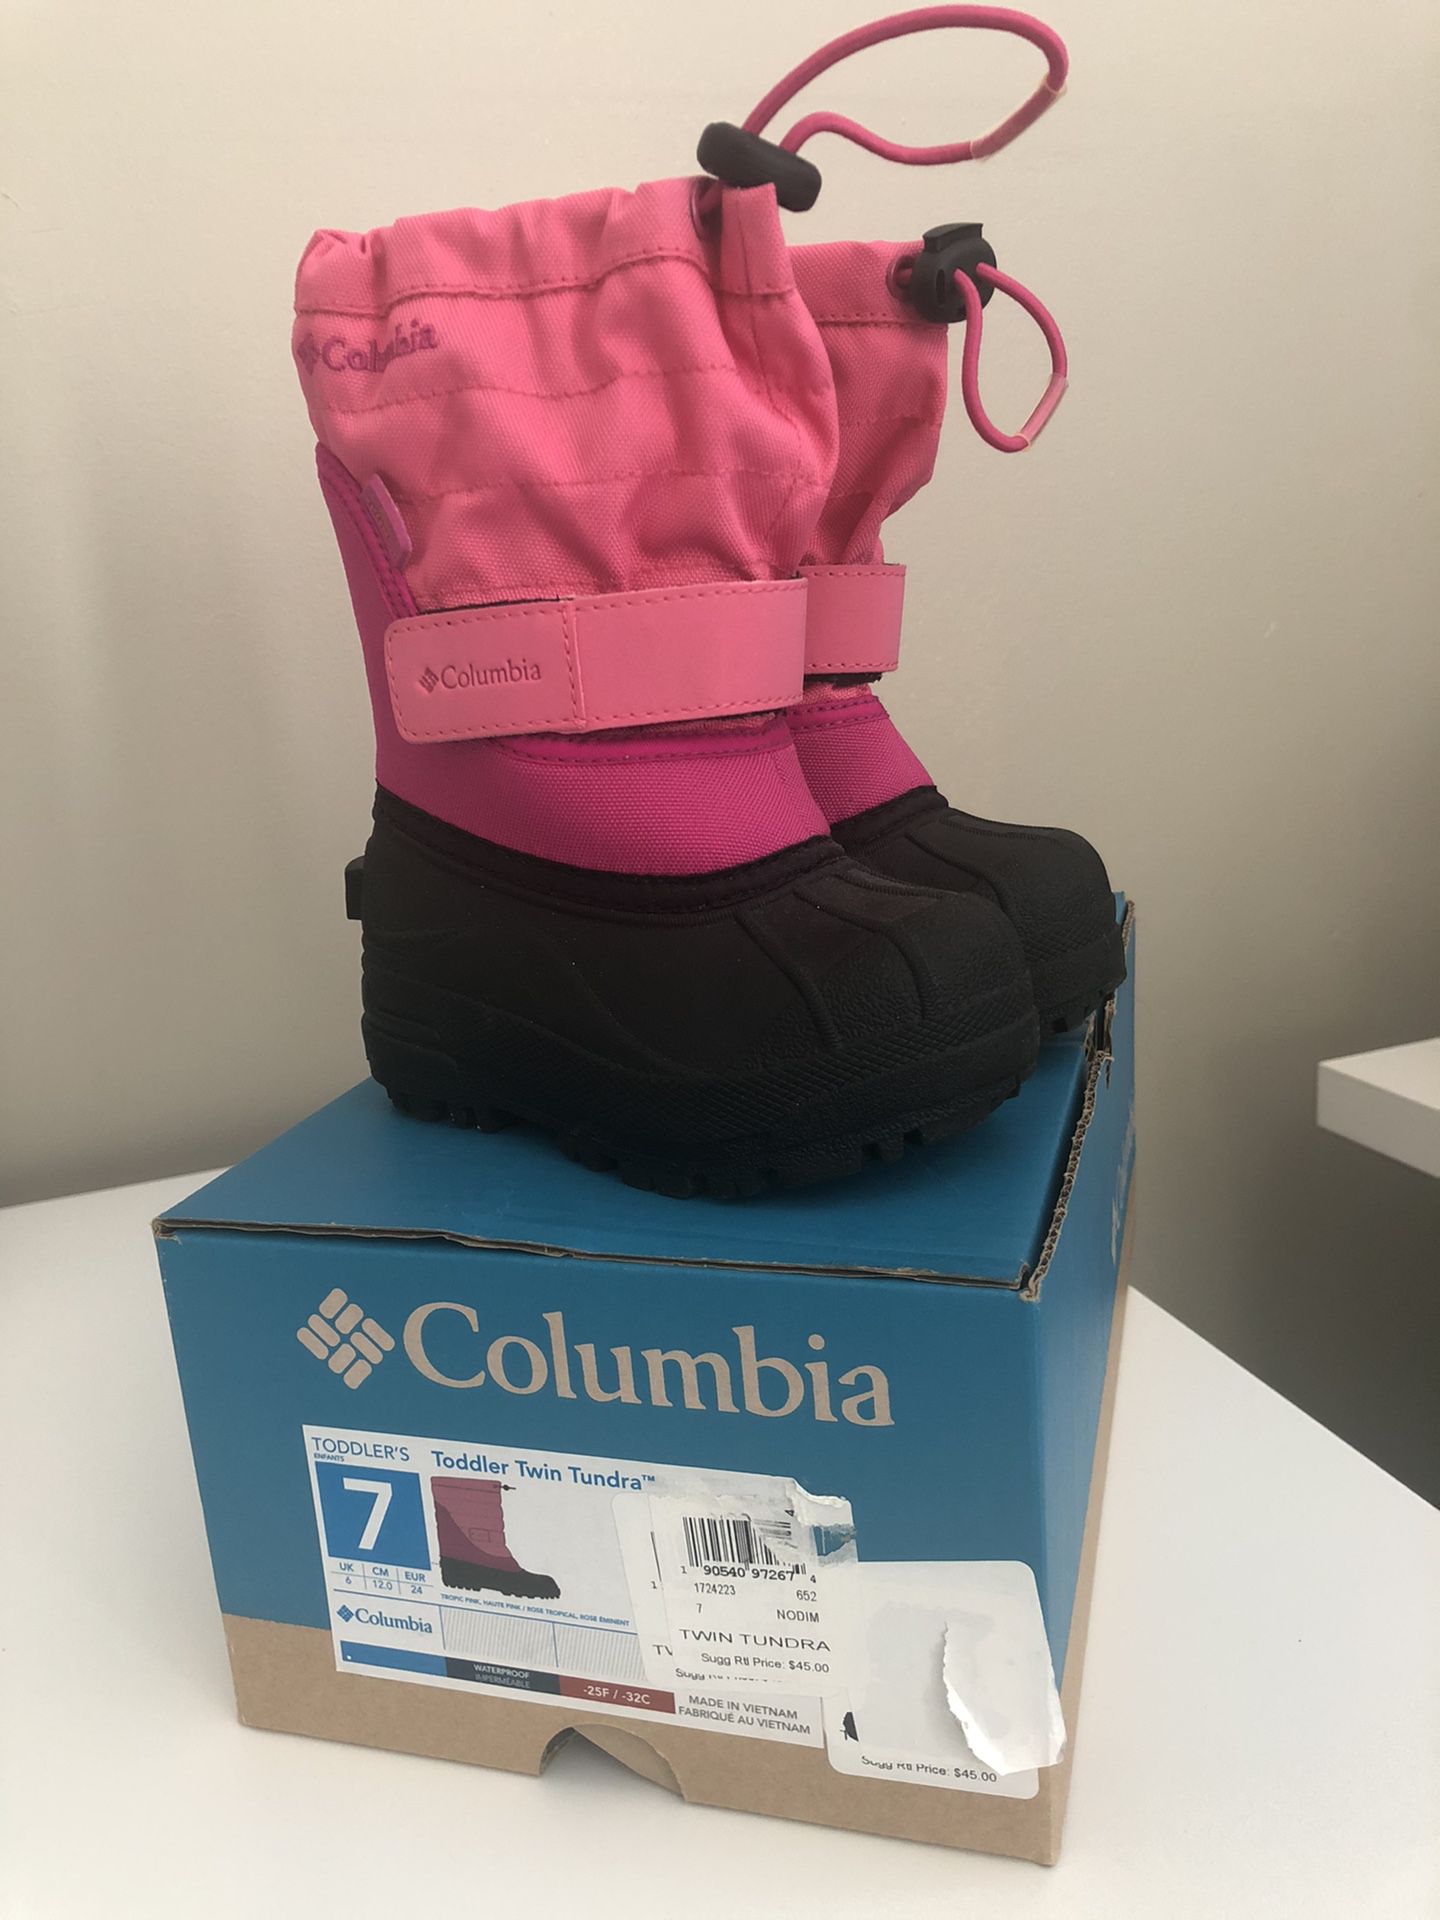 COLUMBIA TODDLER TWIN TUNDRA SNOW BOOTS